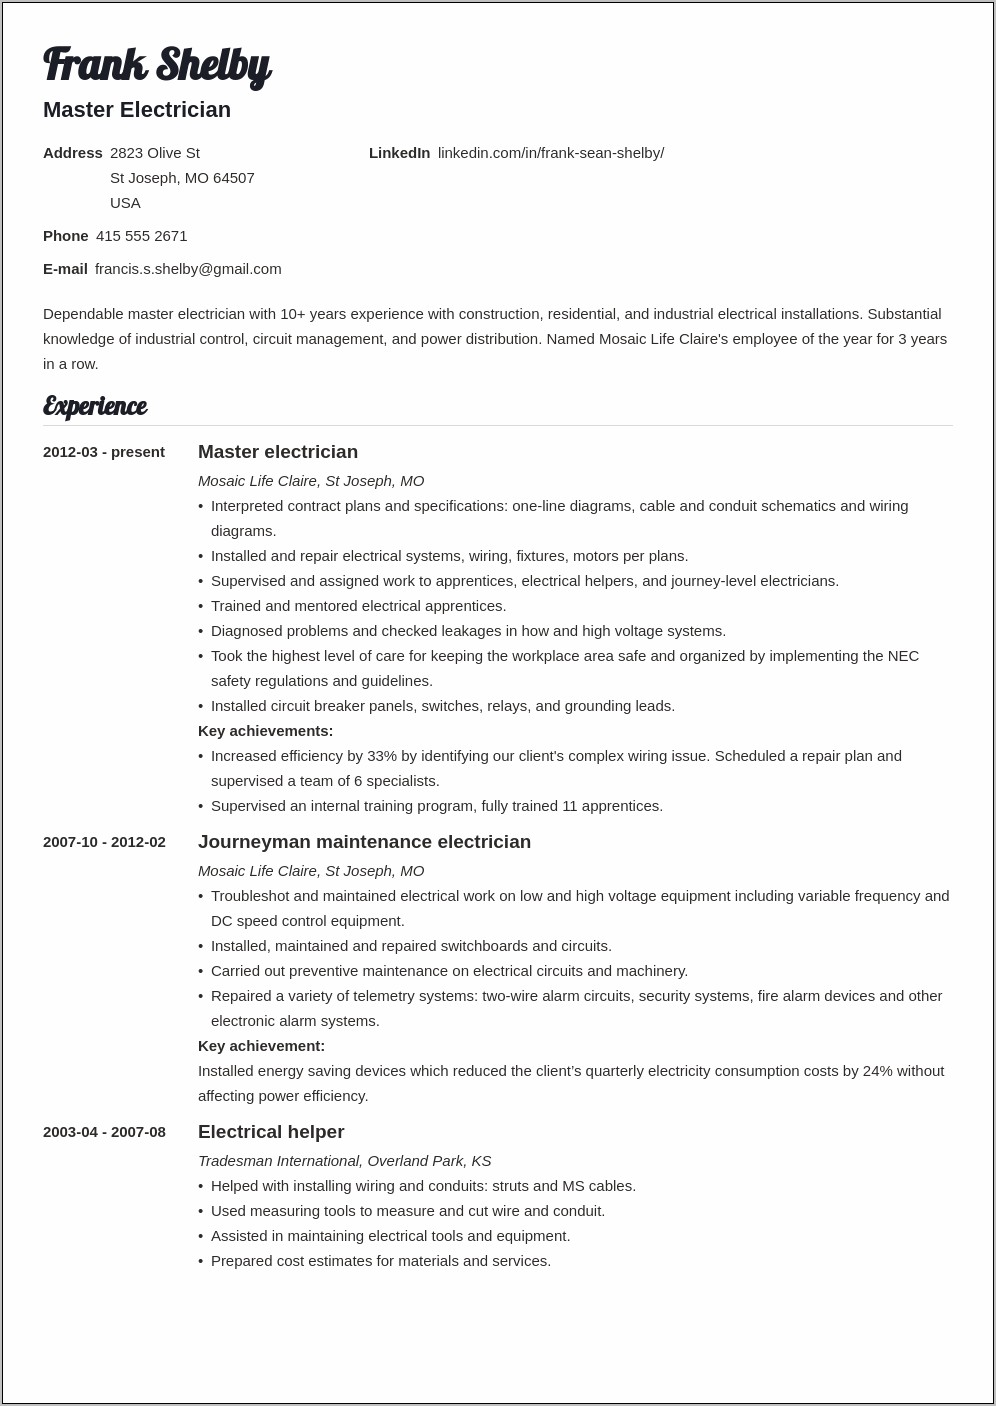 Resume Word For Ability To Work Long Shifts